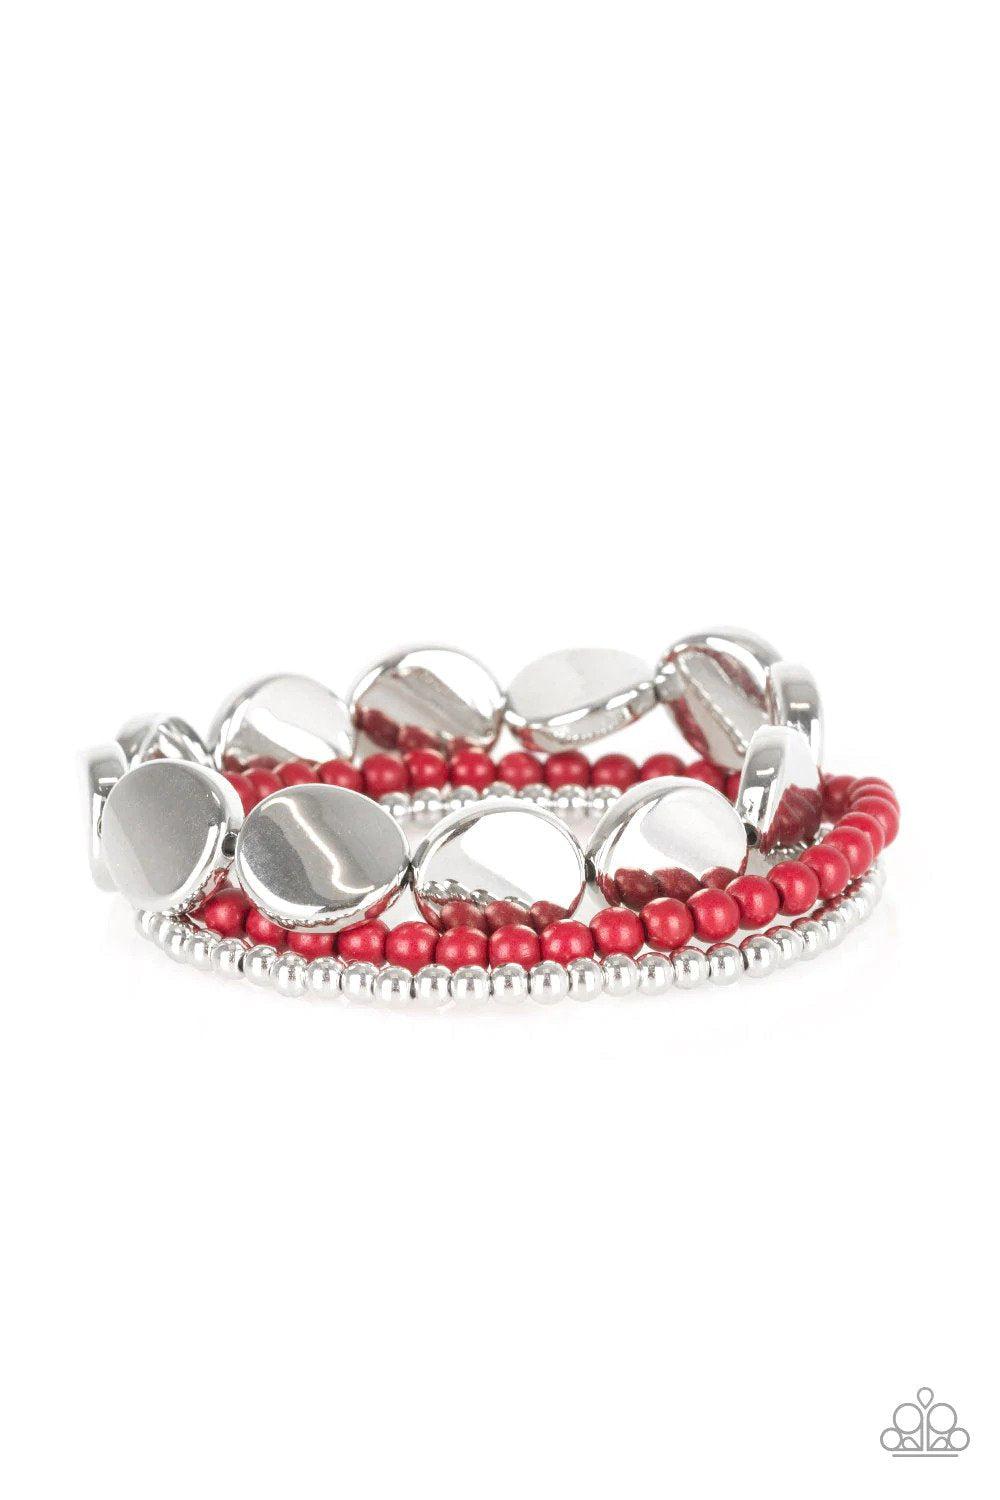 Beyond The Basics Red Bracelet - Paparazzi Accessories- lightbox - CarasShop.com - $5 Jewelry by Cara Jewels